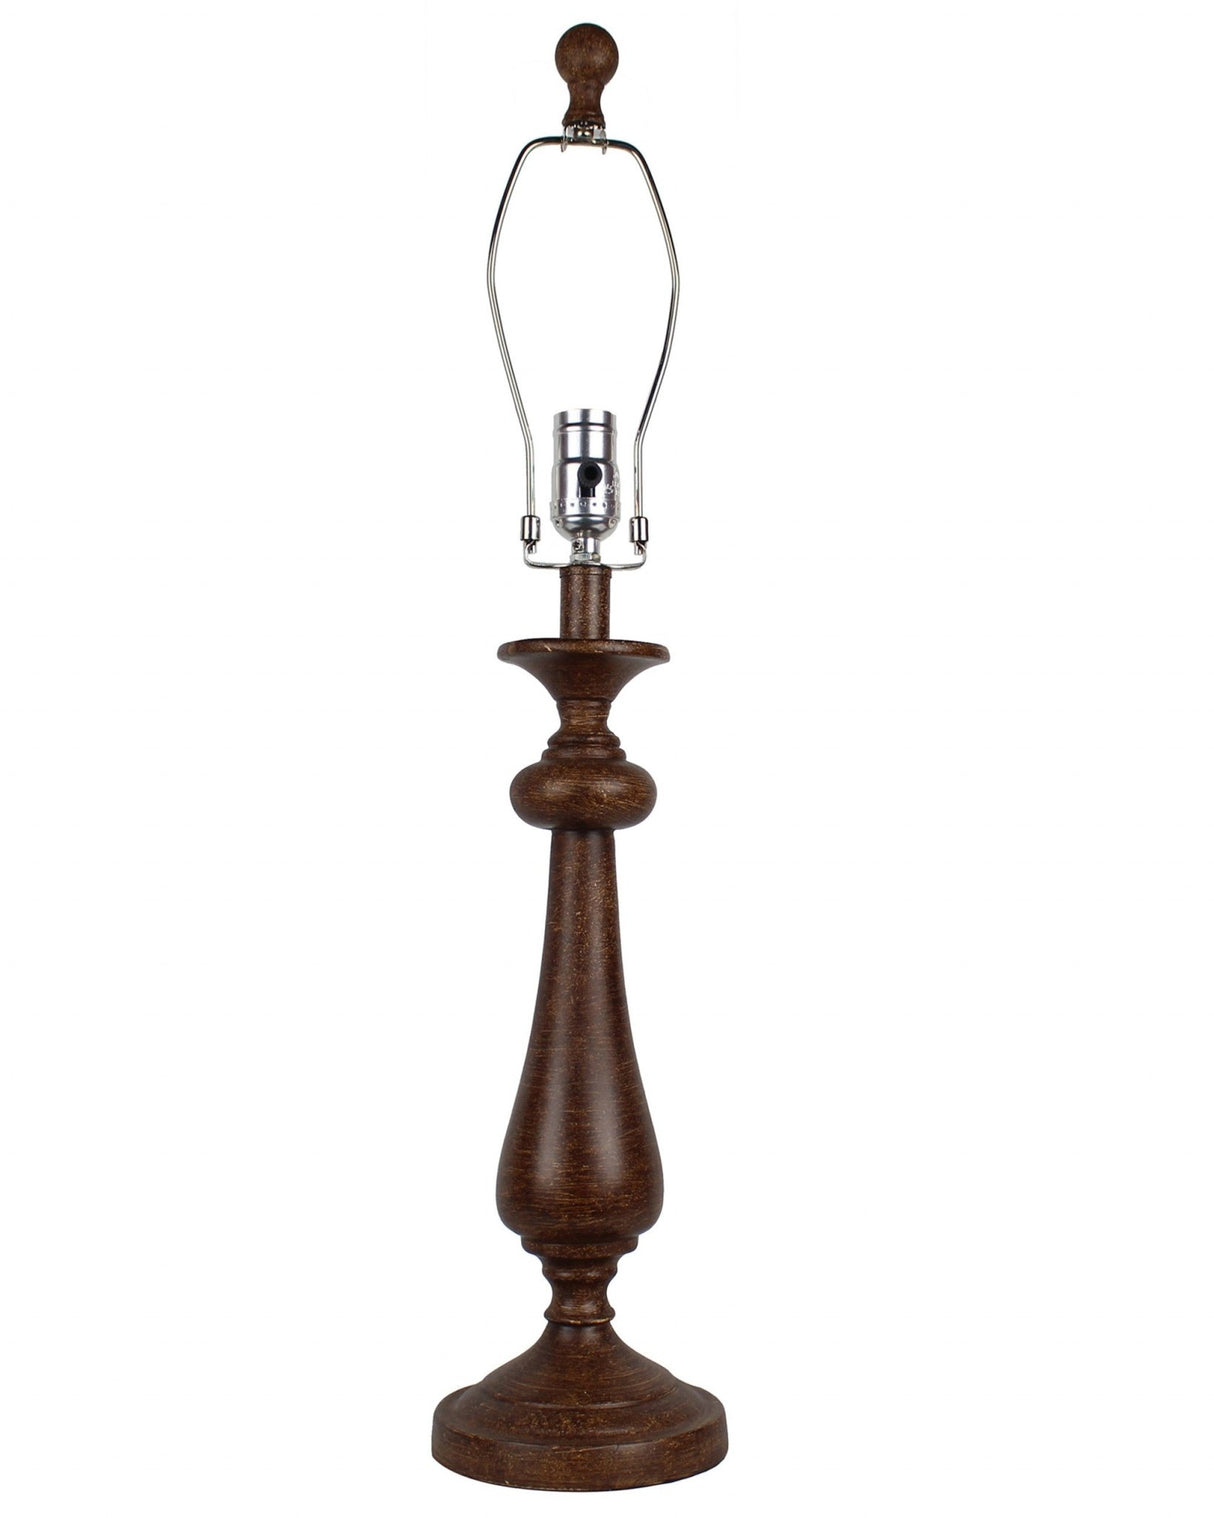 Brown Candlestick Ocean Postcard Table Lamp - Tuesday Morning-Table Lamps